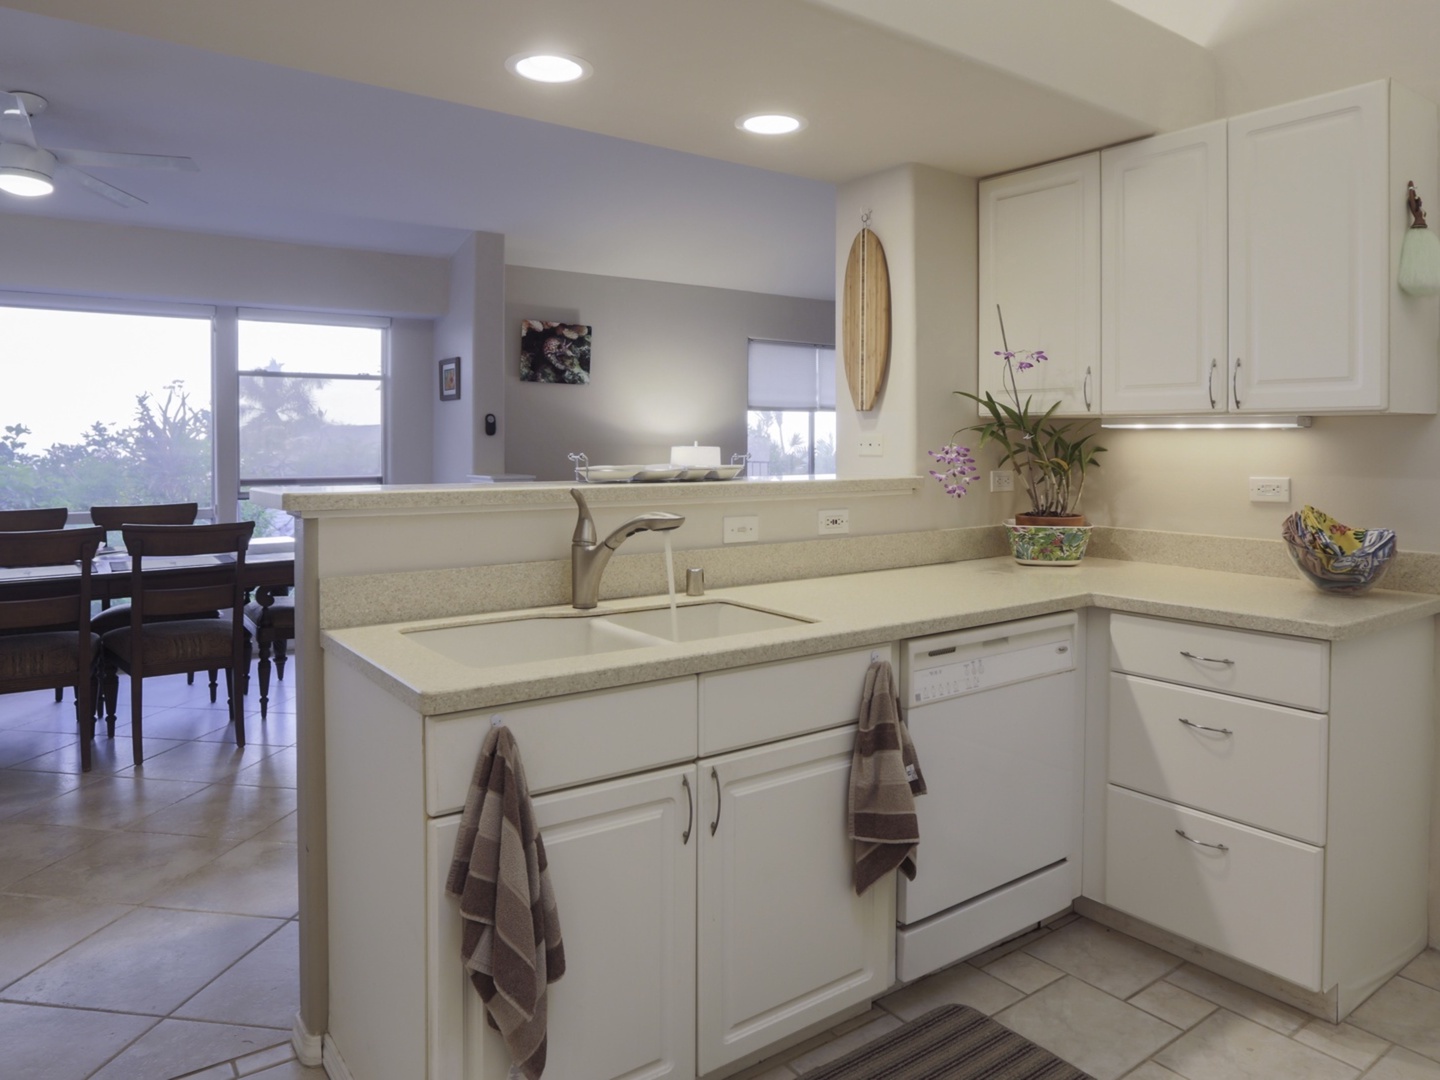 Kailua Kona Vacation Rentals, Hale Alaula - Ocean View - Wide countertops with white cabinetry.